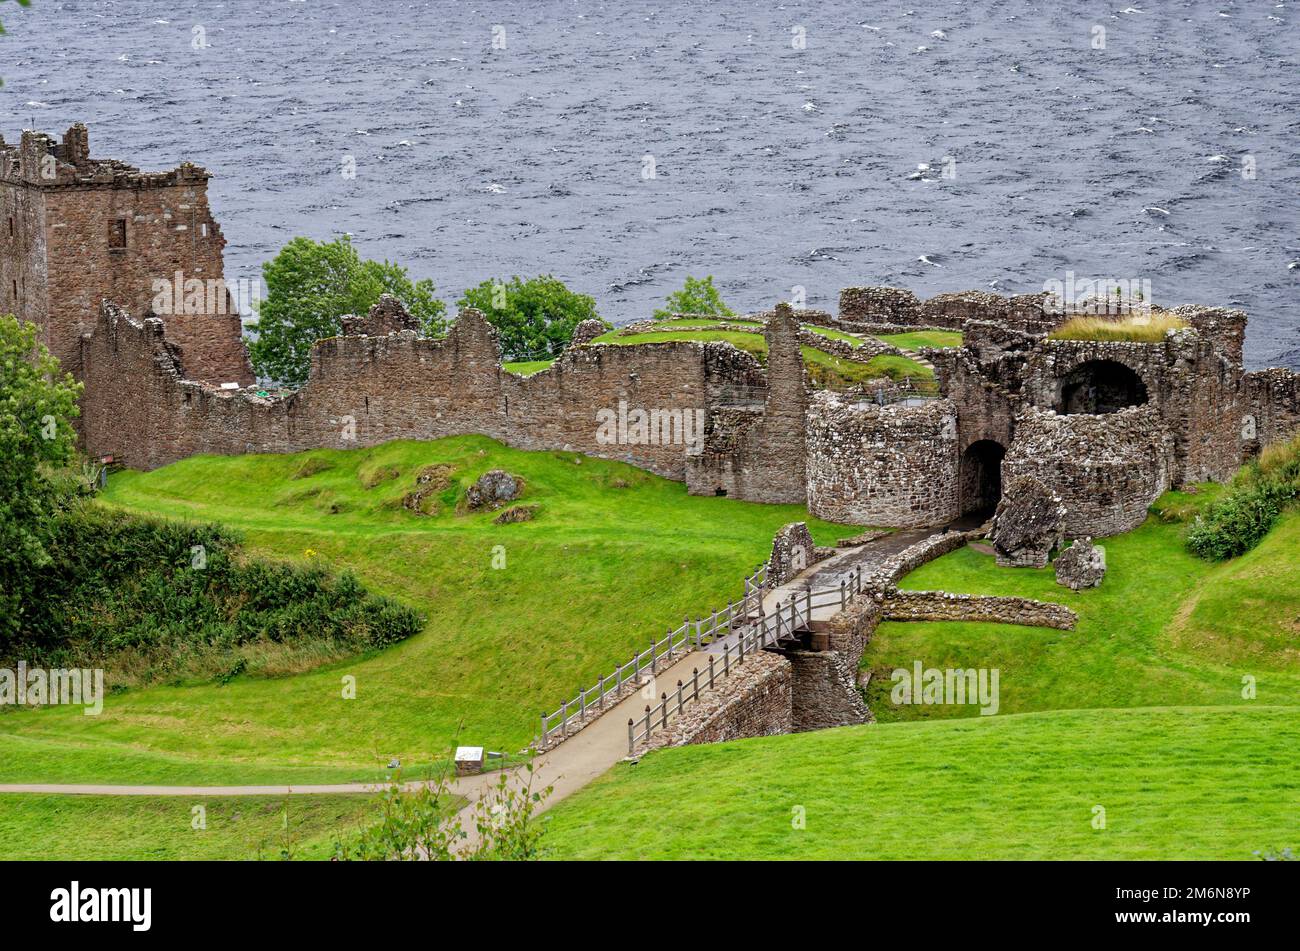 Scottish tourist attraction - Ruins of Urquhart Castle on the western shore of Loch Ness (site of many Nessie sightings) - Drumnadrochit, Highland Stock Photo